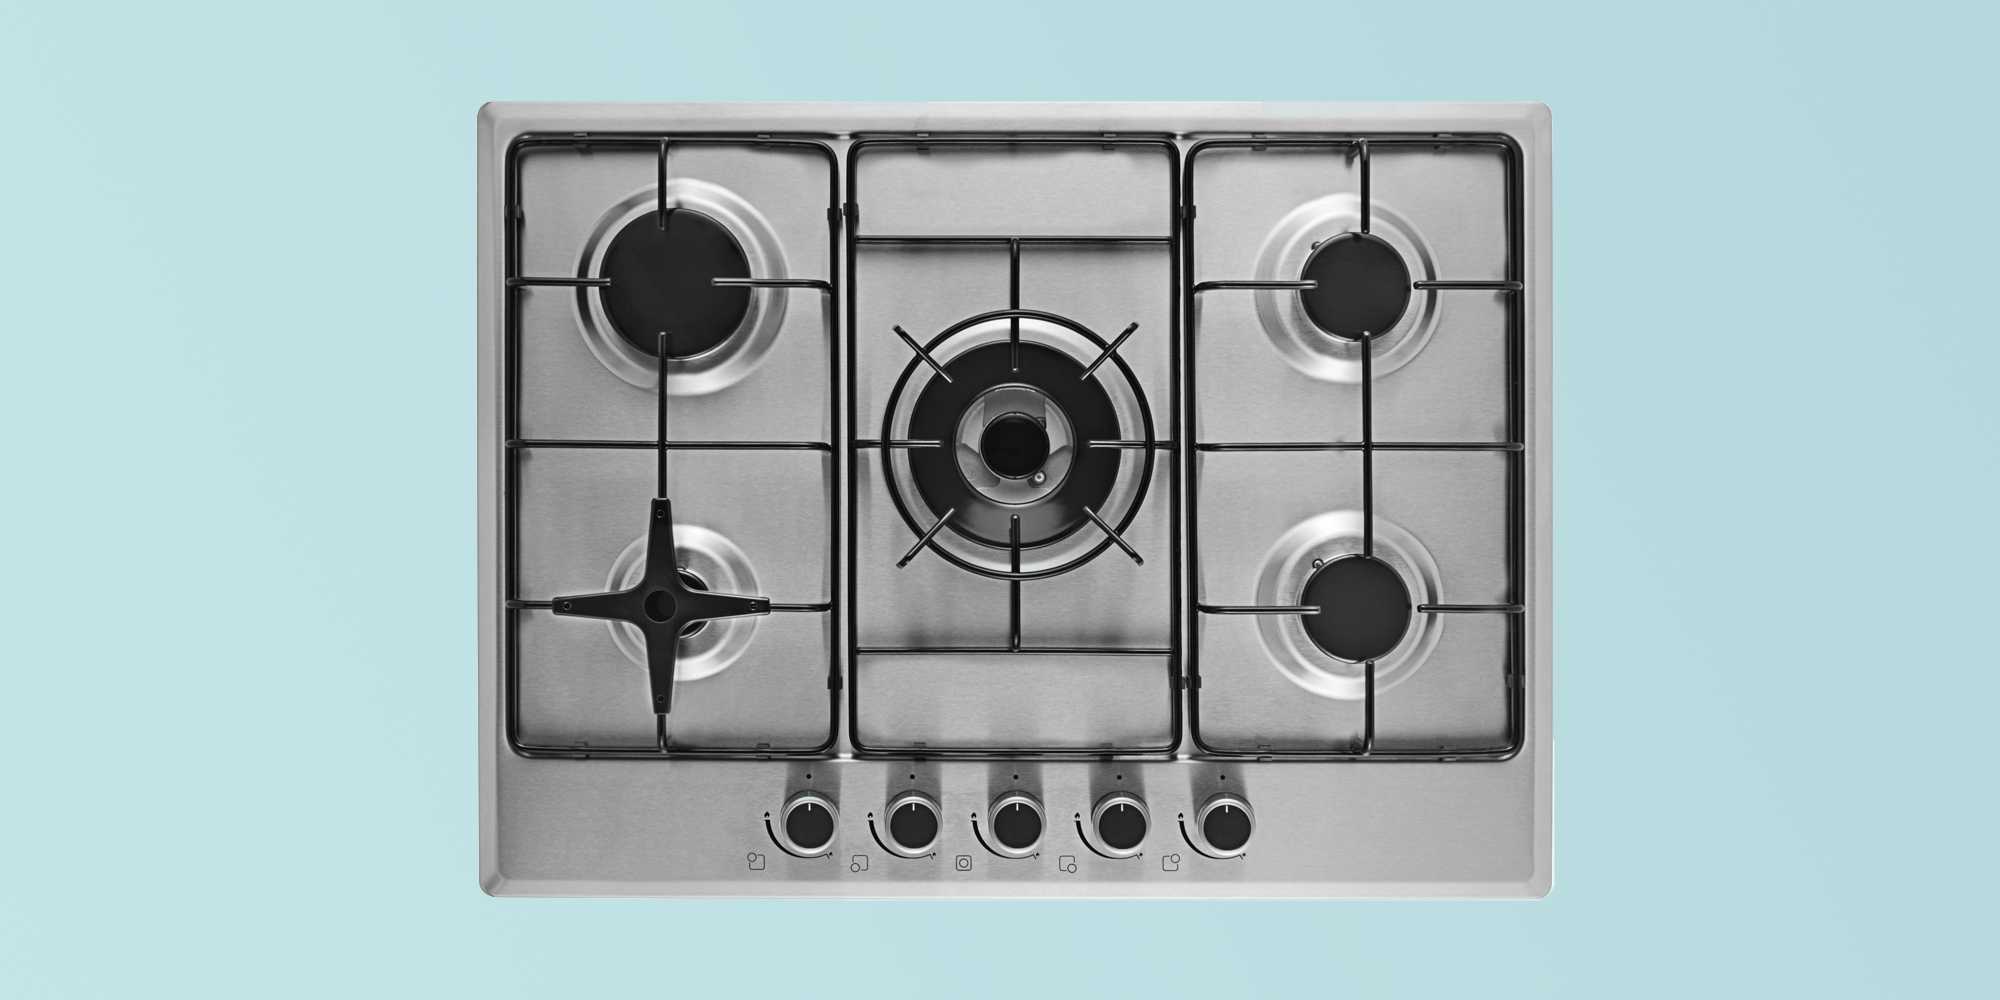 10 Best Gas Range Stove Reviews 2020 Top Rated Gas Ranges